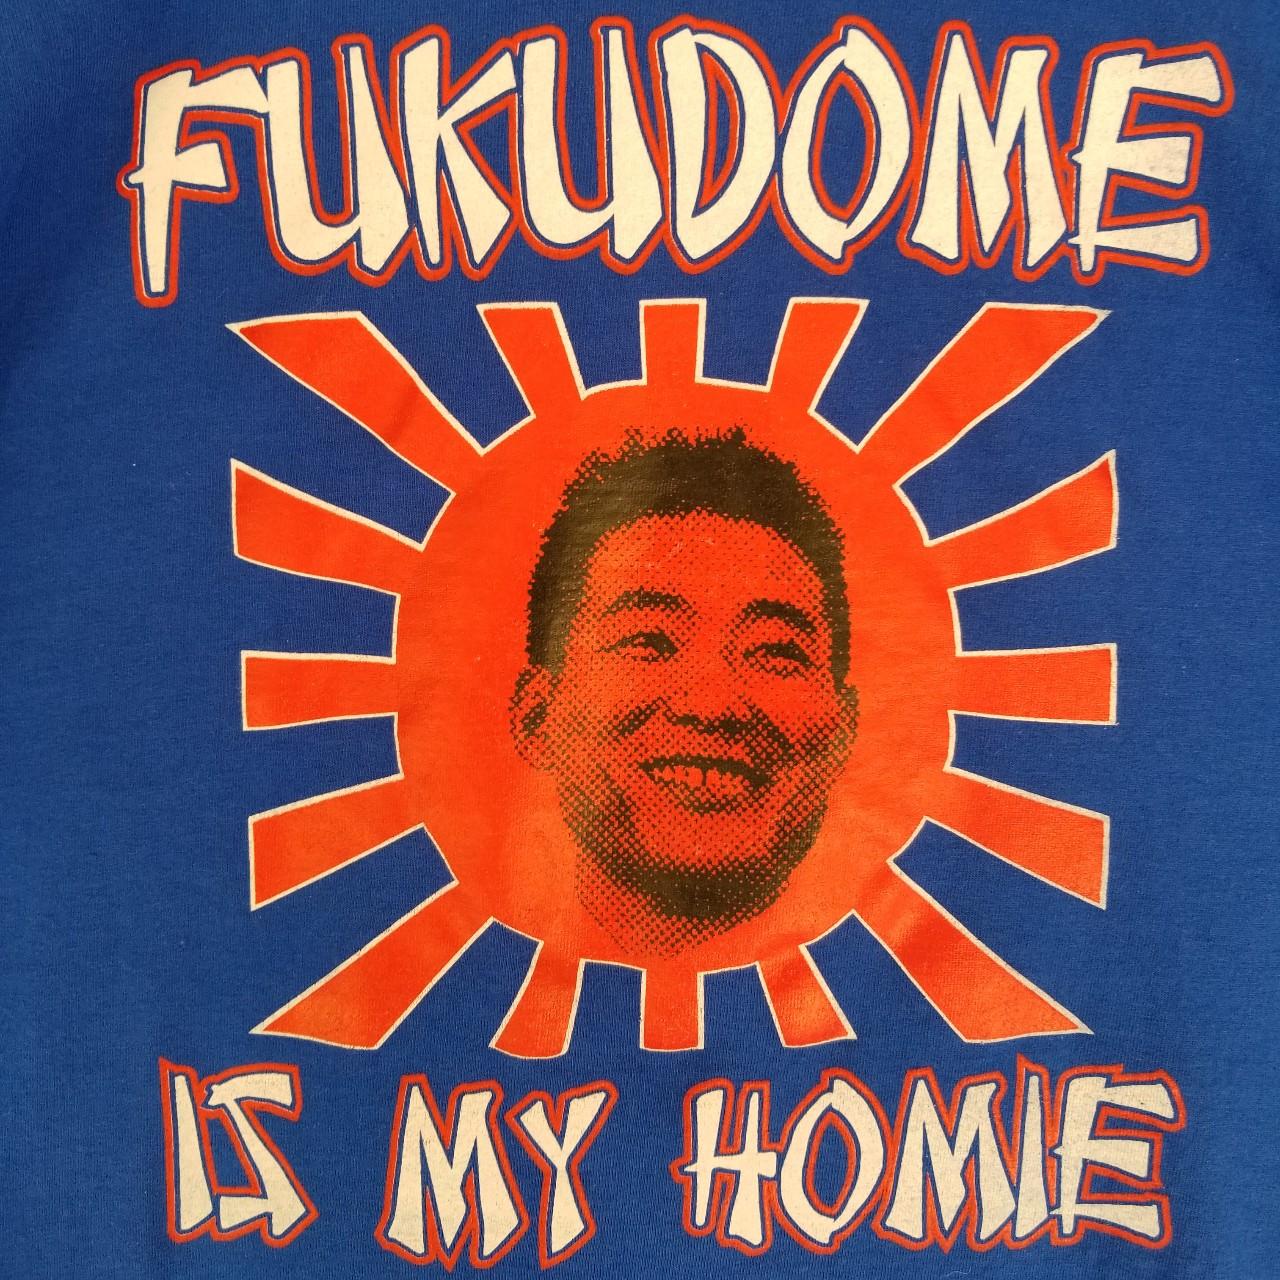 Fukudome is my Homie up for grabs. In 2008